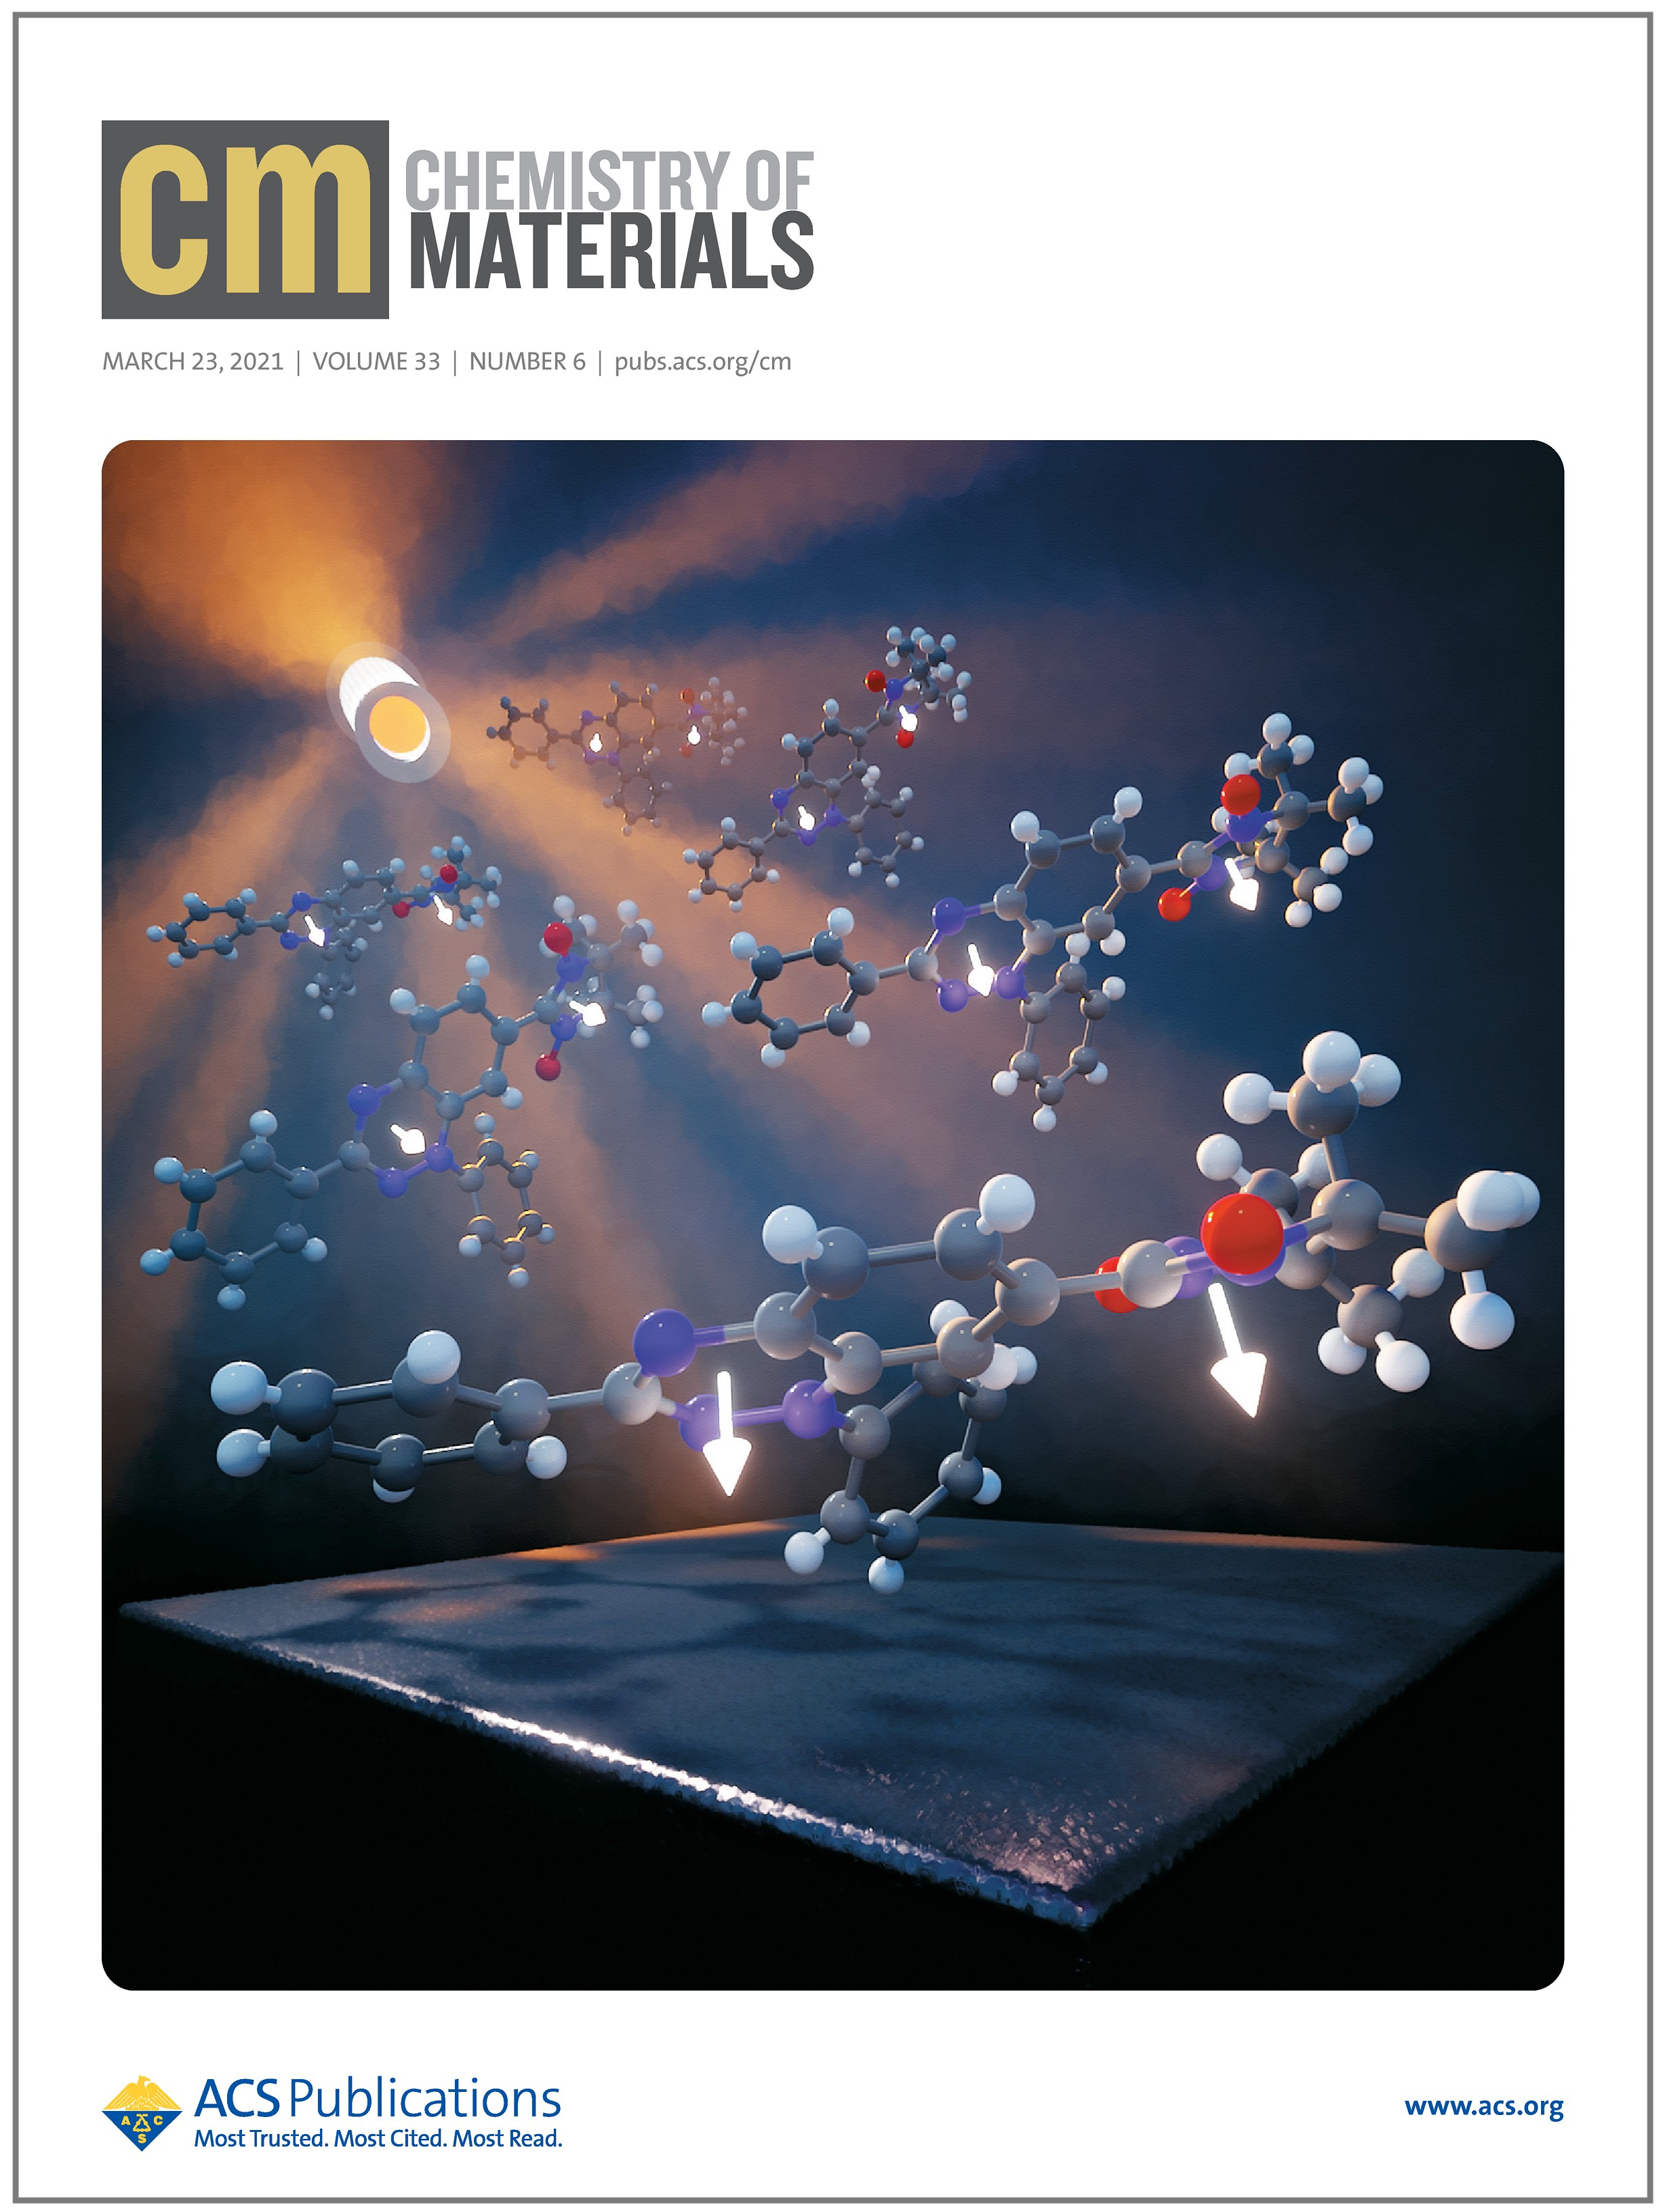 Diradicals evaporation on the cover